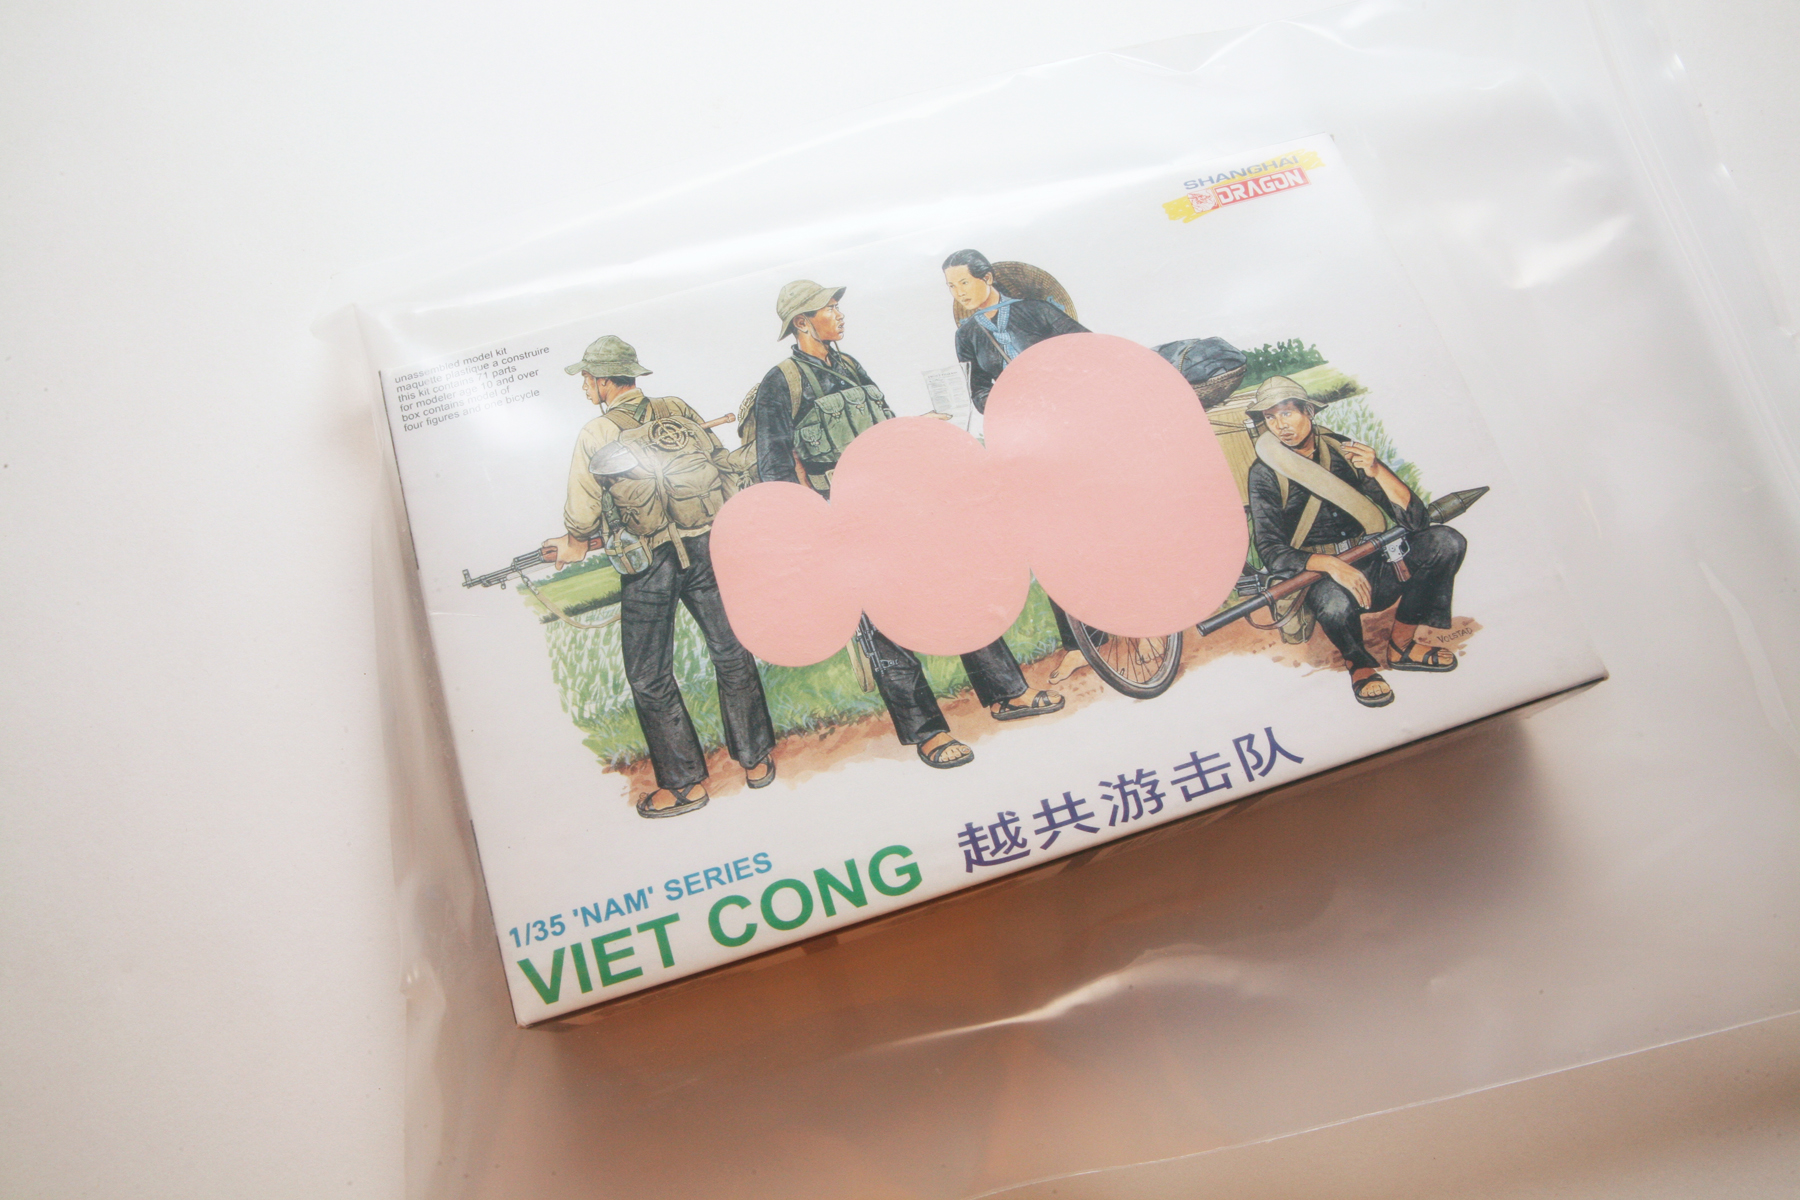 A Viet Cong model kit box painted with a pink geometric shape of three ovals.